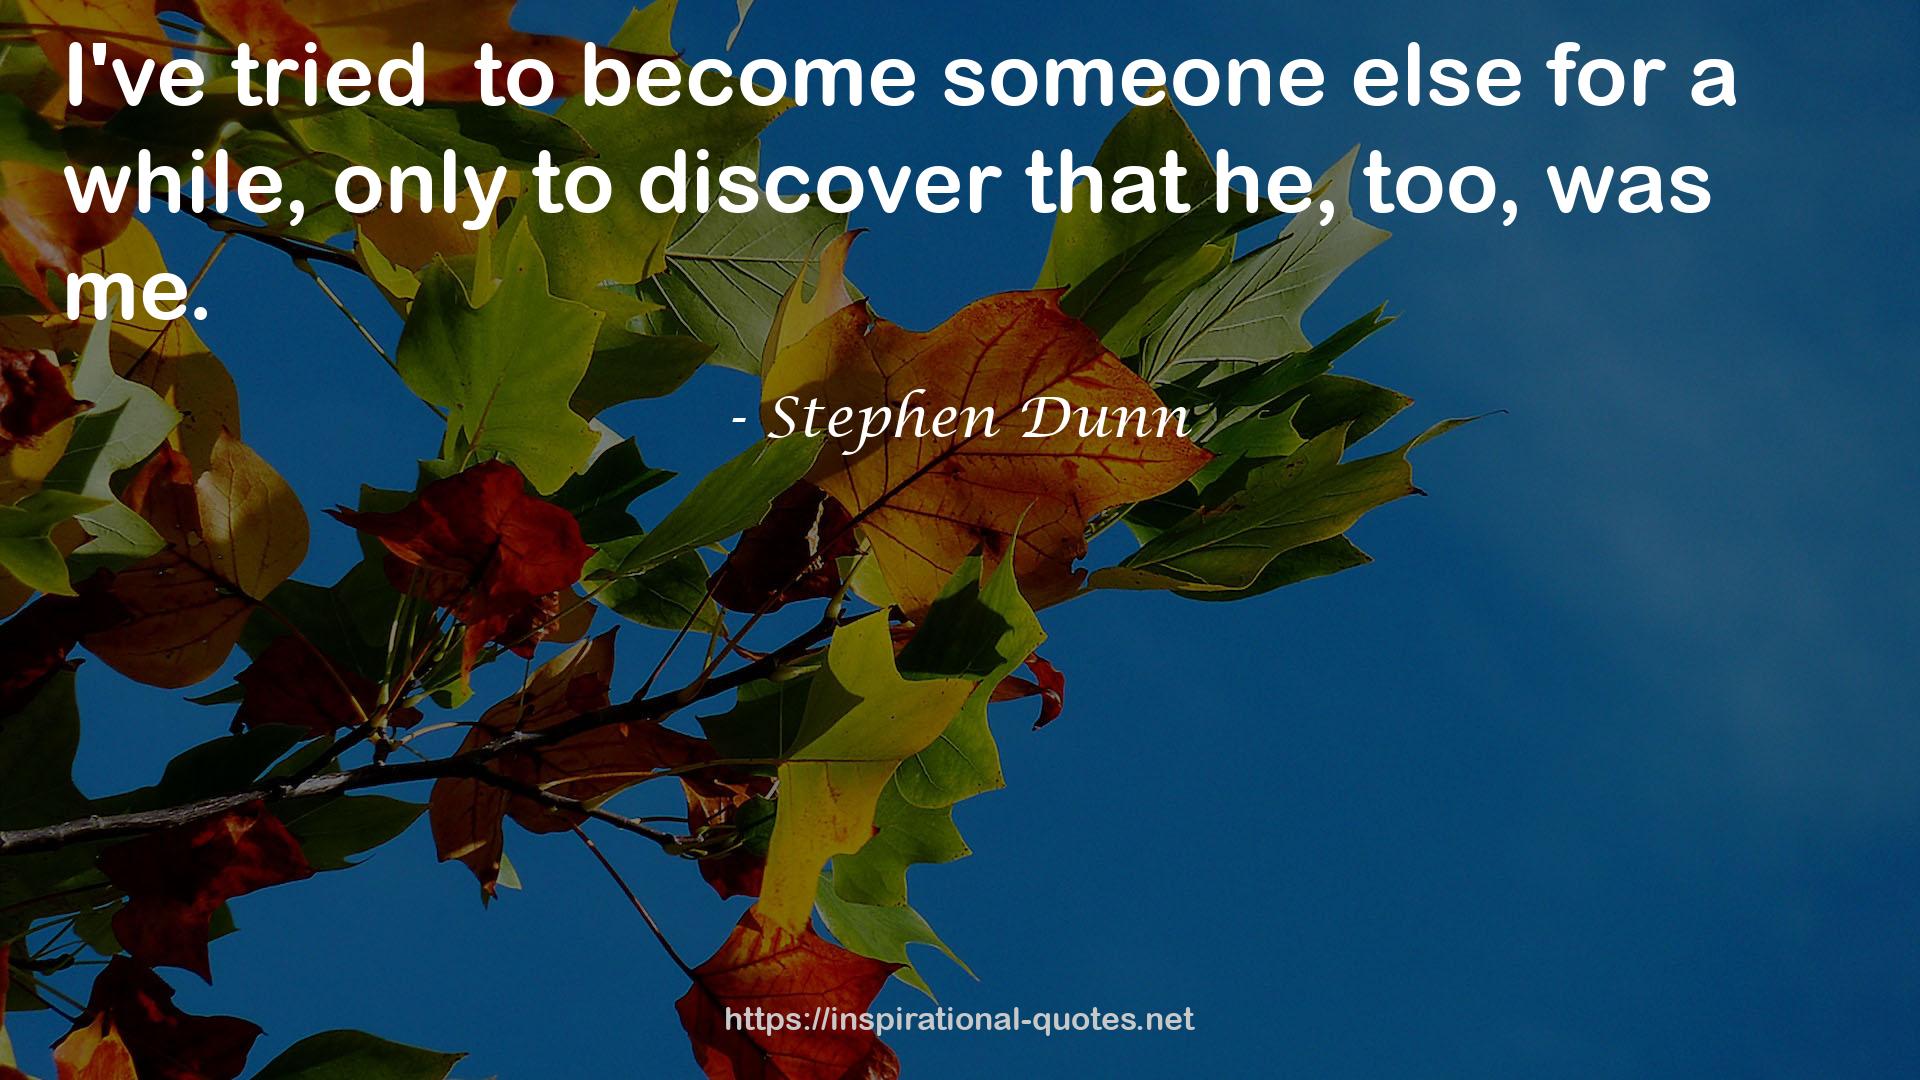 Stephen Dunn QUOTES